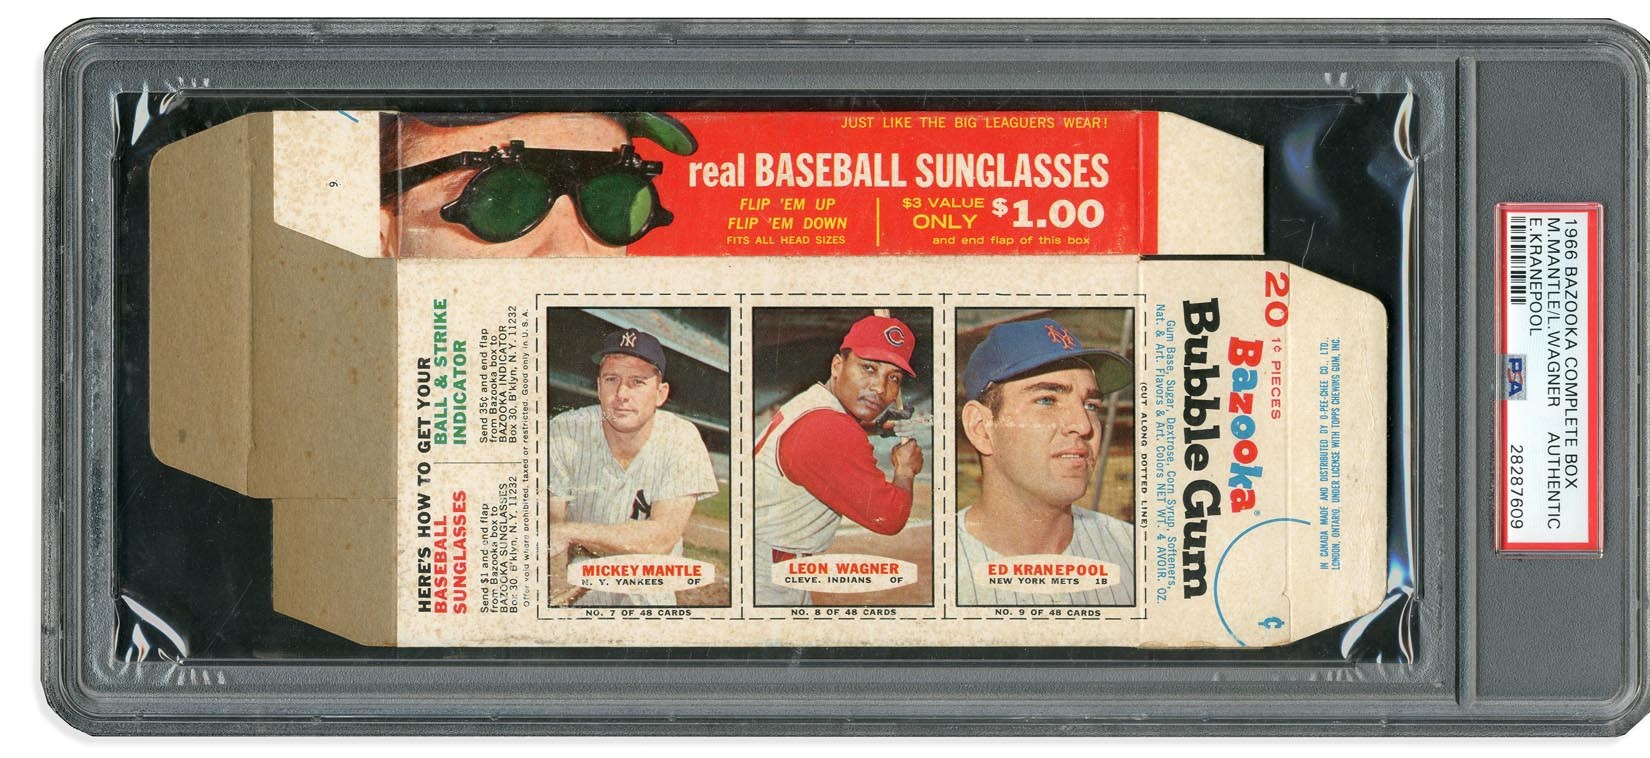 Baseball and Trading Cards - 1966 Bazooka Complete Box with Mantle, Wagner and Kranepool PSA Authentic